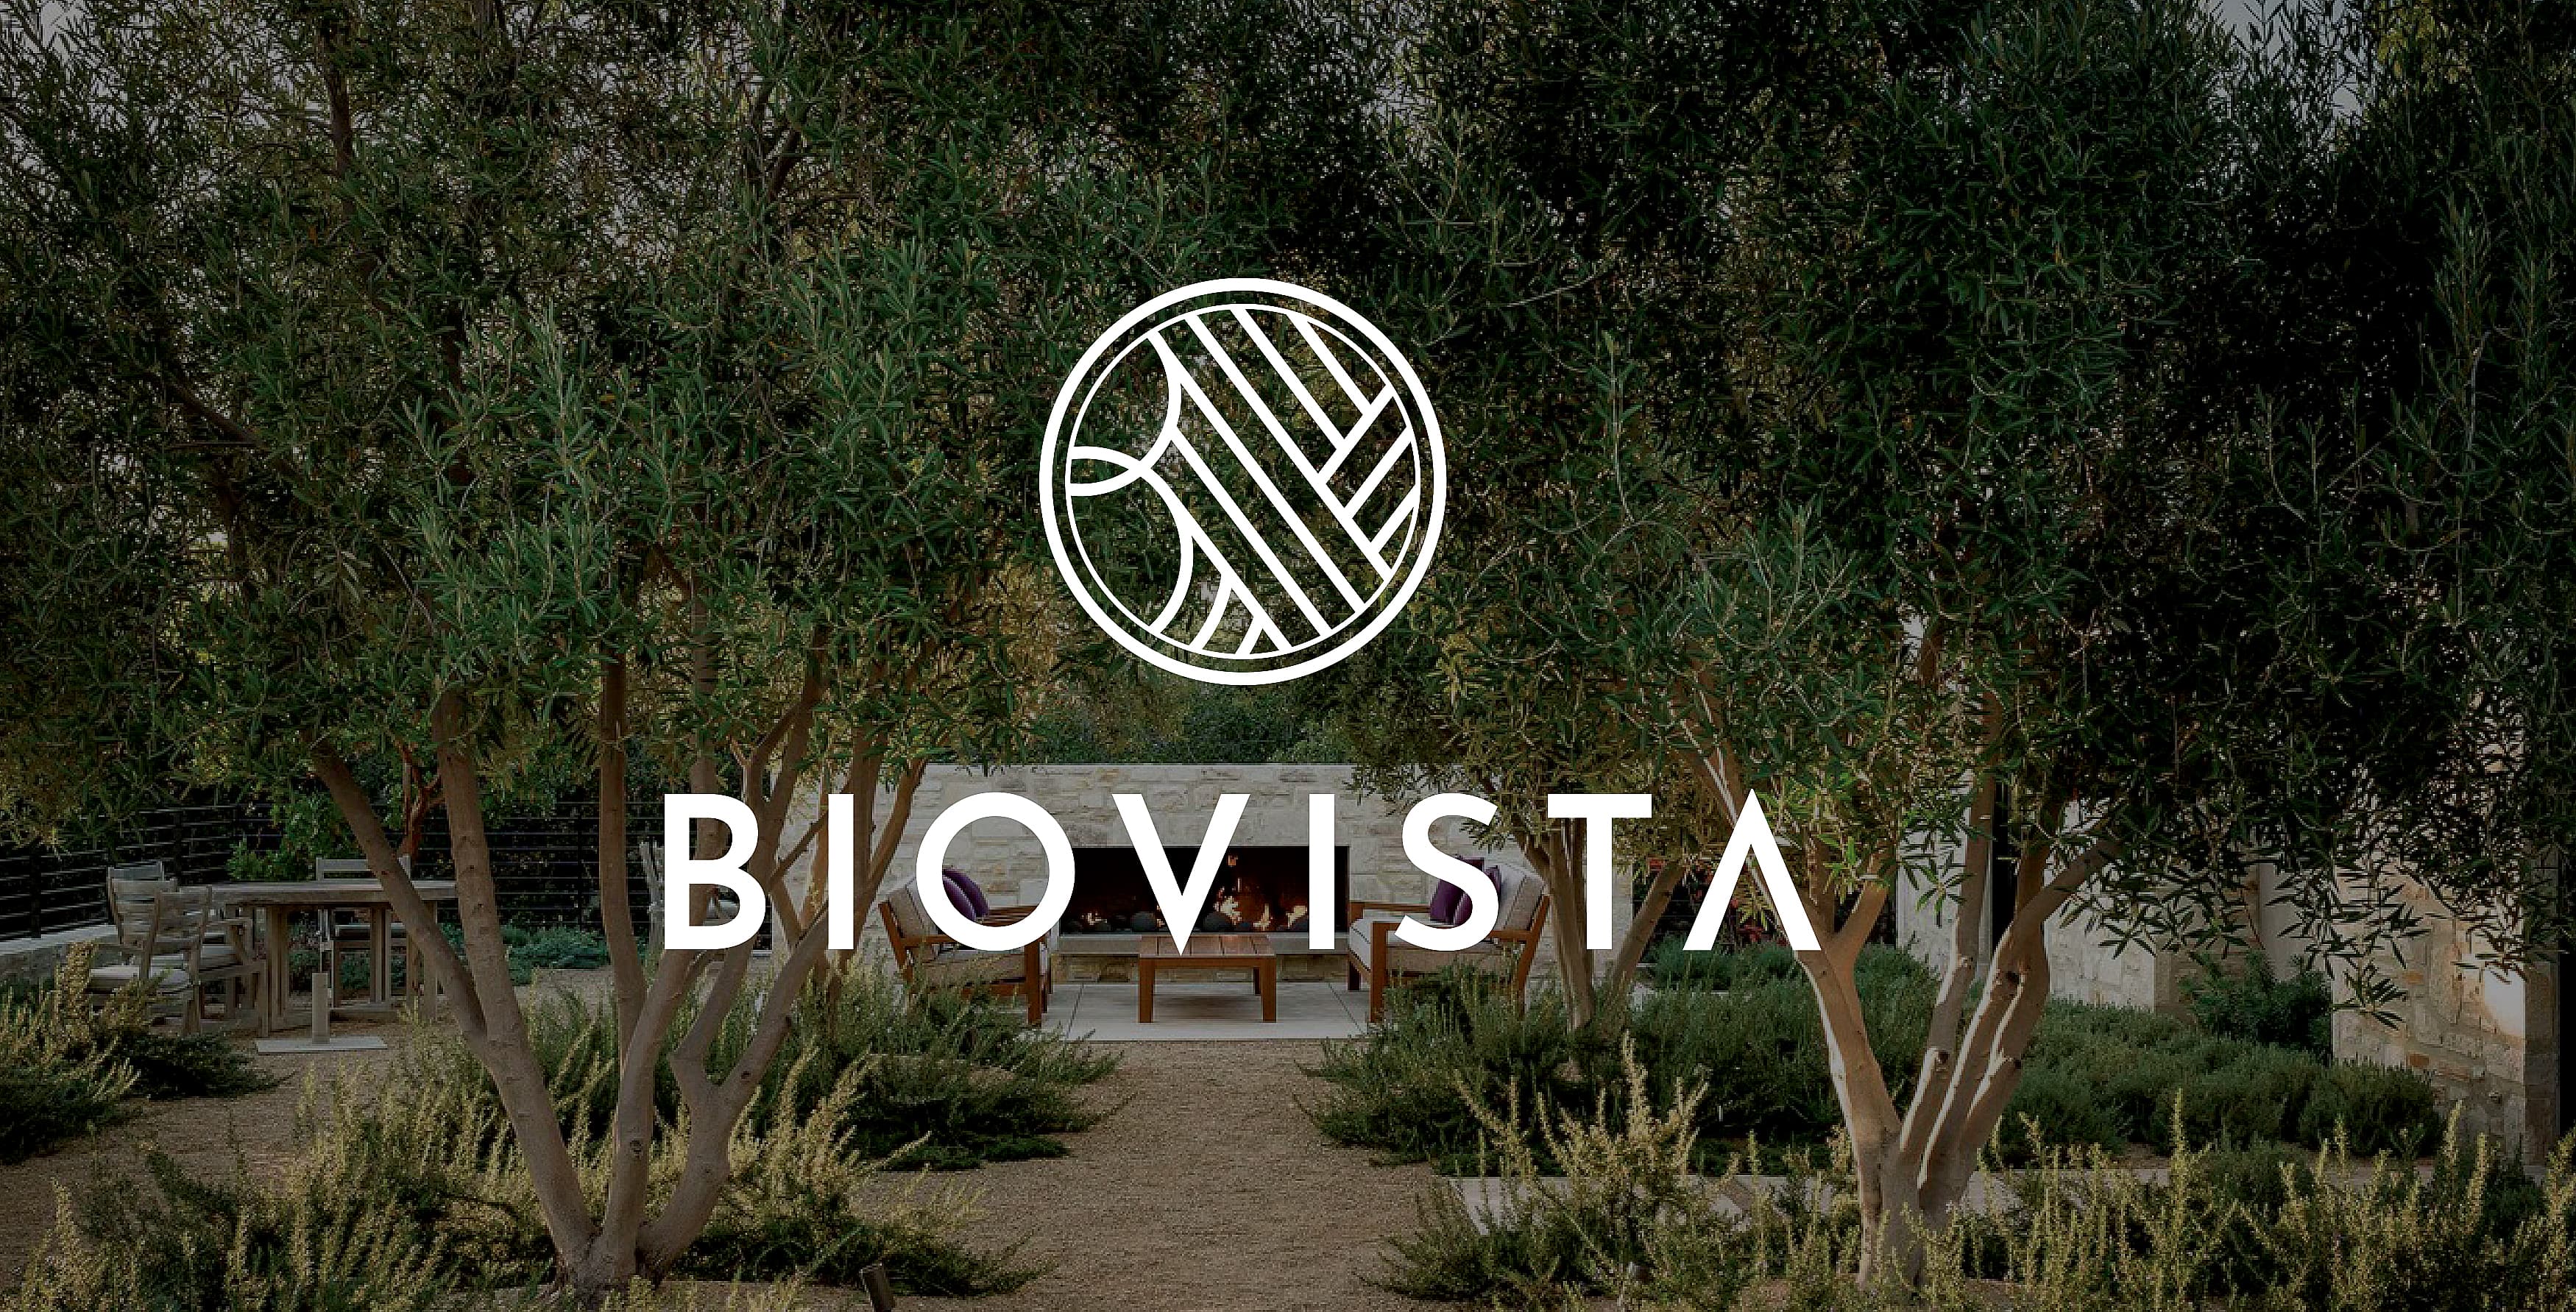 Primary BioVista wordmark and icon logo in white overlayed on top of an image of an outdoor courtyard with sitting areas and greenery and landscape.